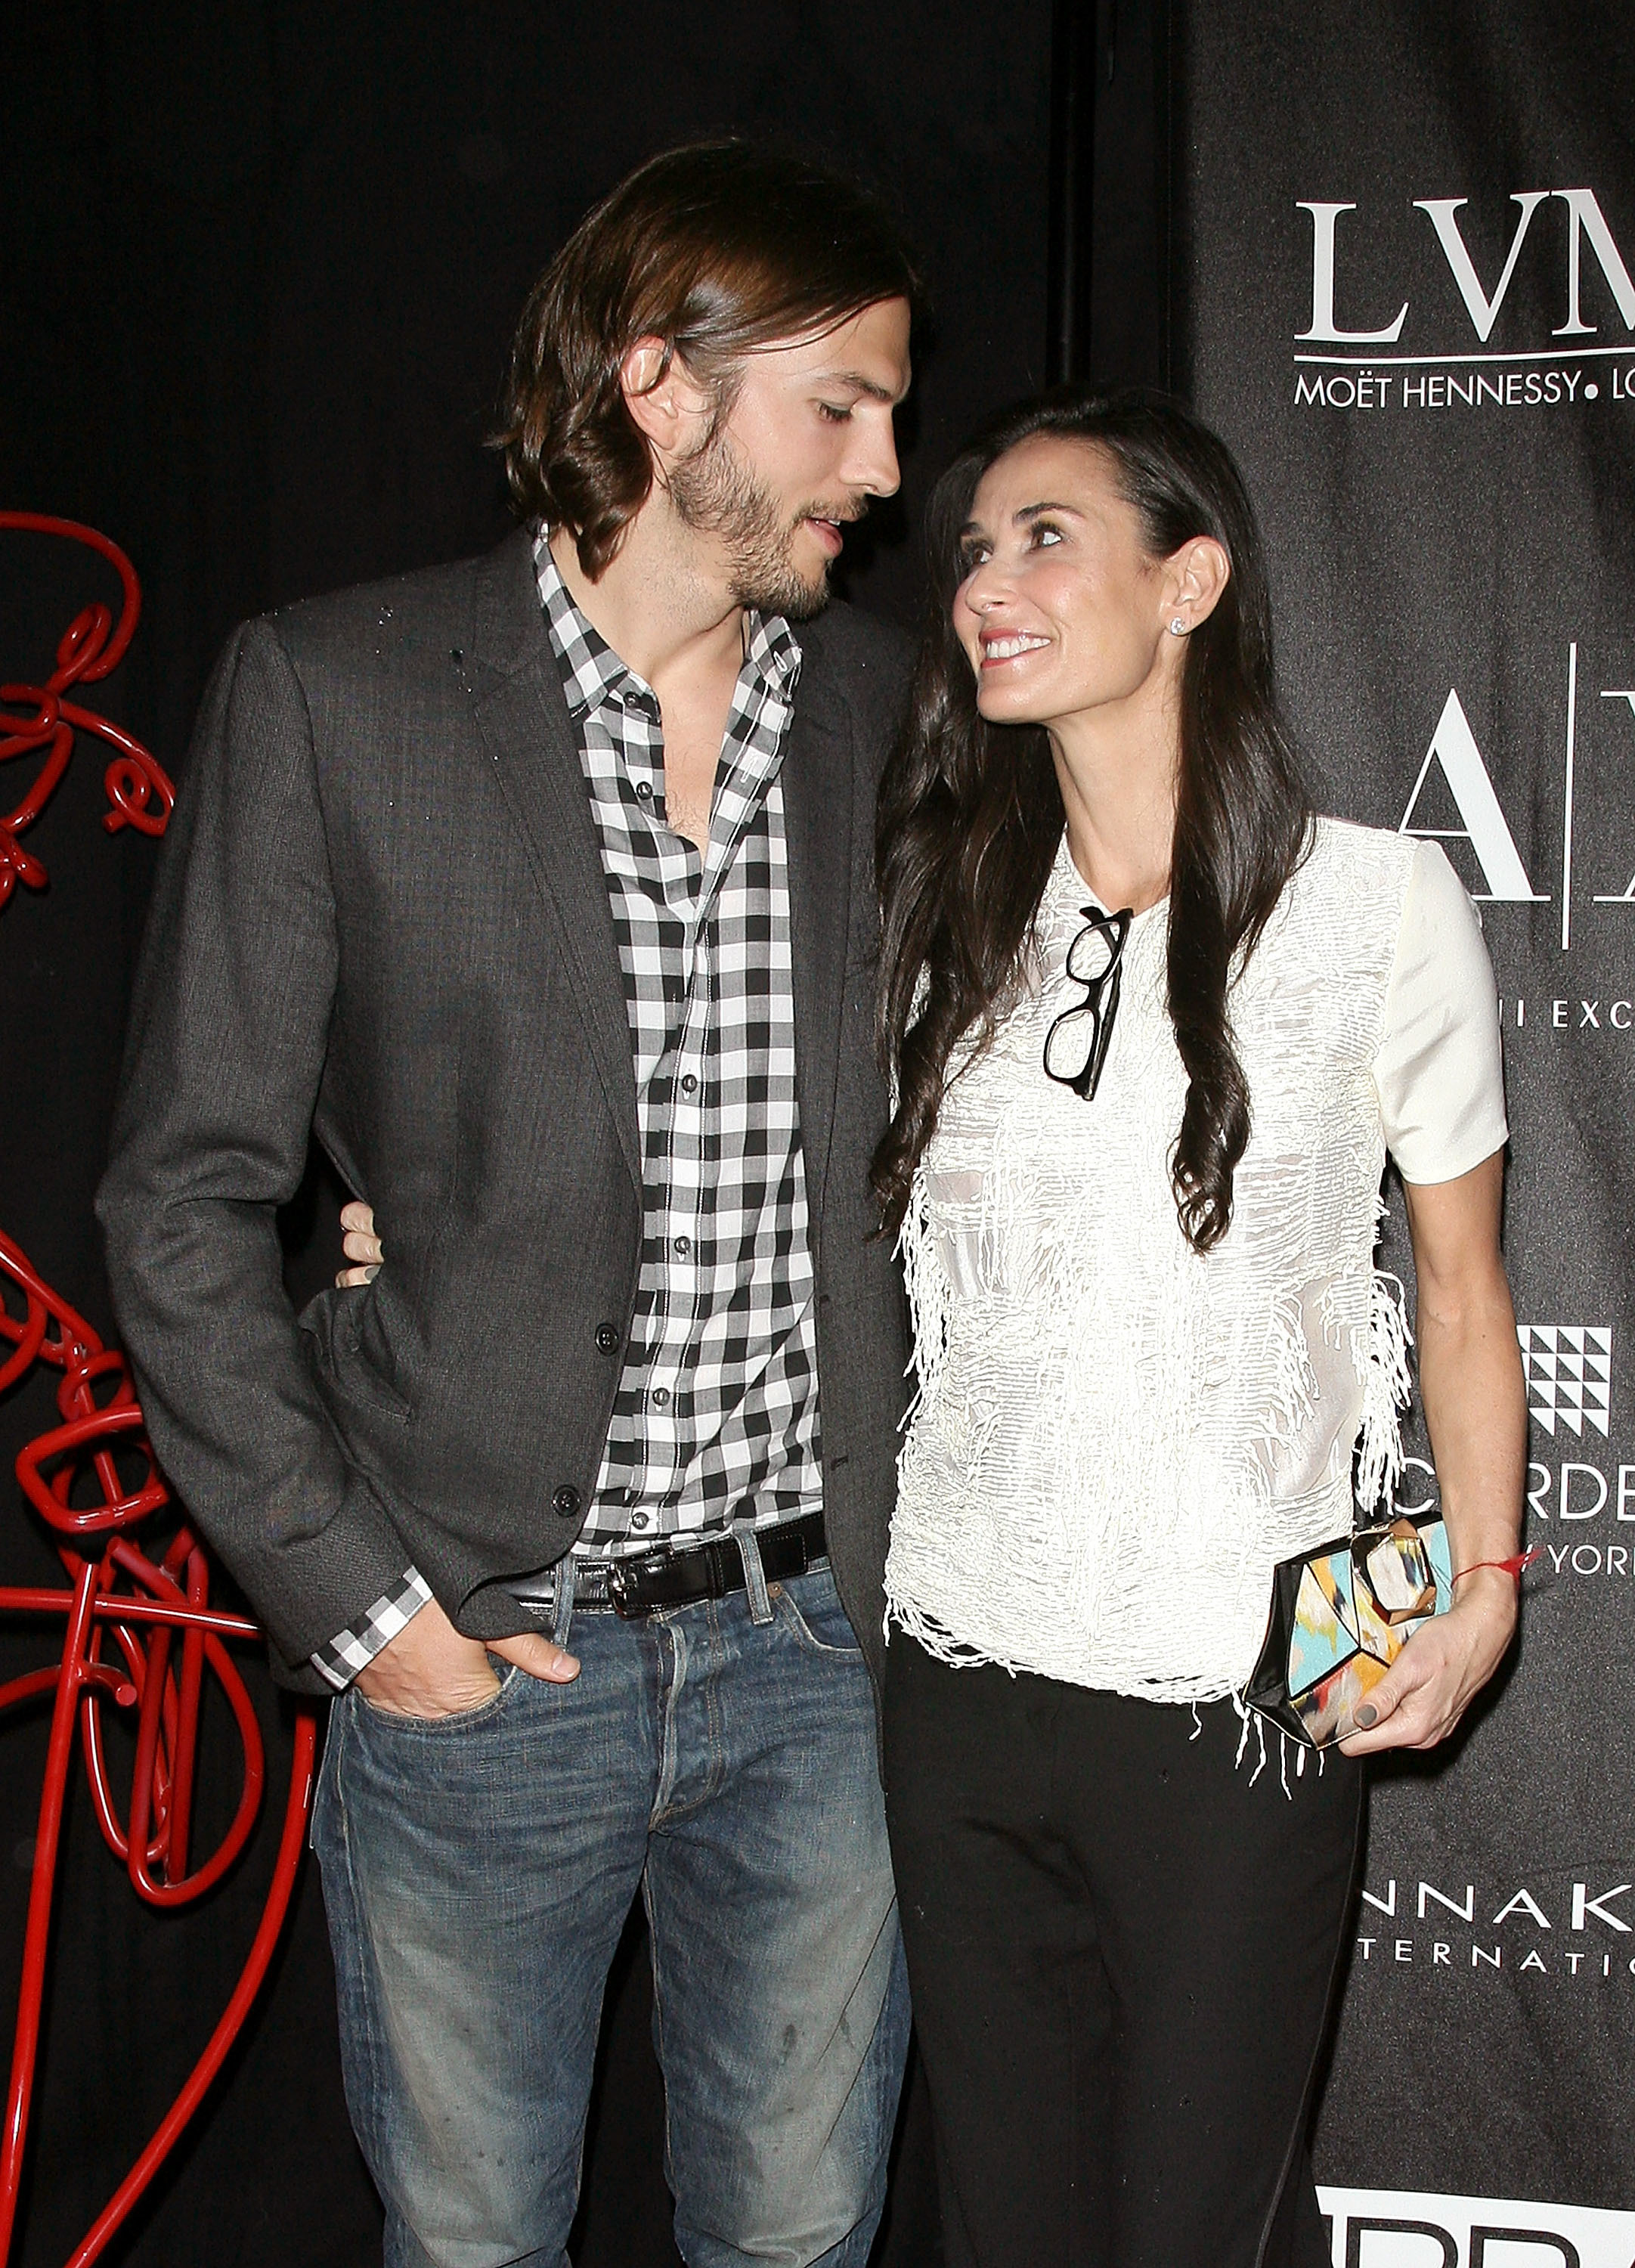 <p>When <a href="https://www.wonderwall.com/celebrity/profiles/overview/ashton-kutcher-240.article">Ashton Kutcher</a> and <a href="https://www.wonderwall.com/celebrity/profiles/overview/demi-moore-270.article">Demi Moore</a> wed in 2005, she was labeled a cougar because of their 15-year age difference. Her eldest daughter, Rumer Willis, was only 10 years younger than her then-stepfather. After their divorce in 2013, Ashton linked up with actress Mila Kunis, who is much closer to him in age. (Ashton is only five years older than Mila.)</p>